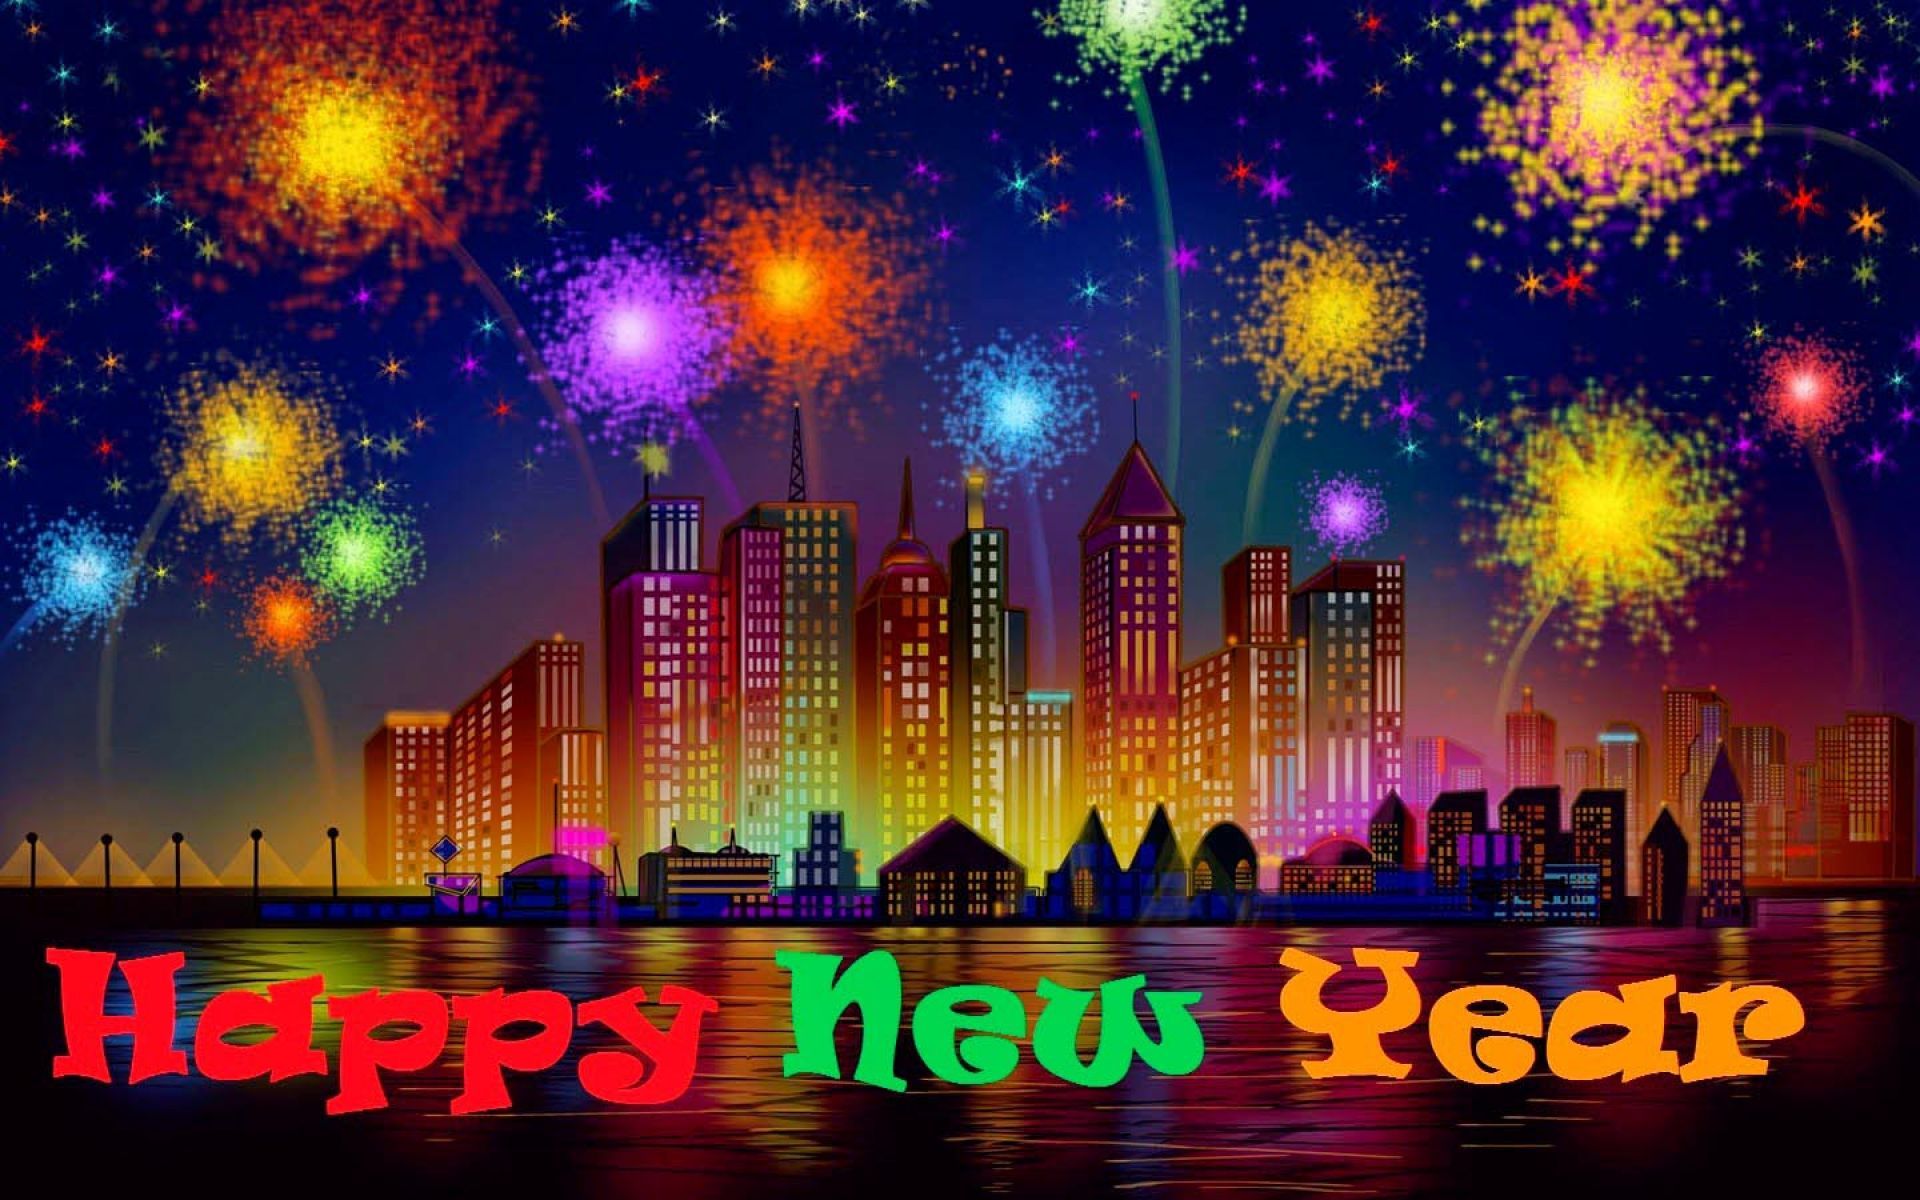 Happy New Year Fireworks Image Wallpaper New Year Editing Background